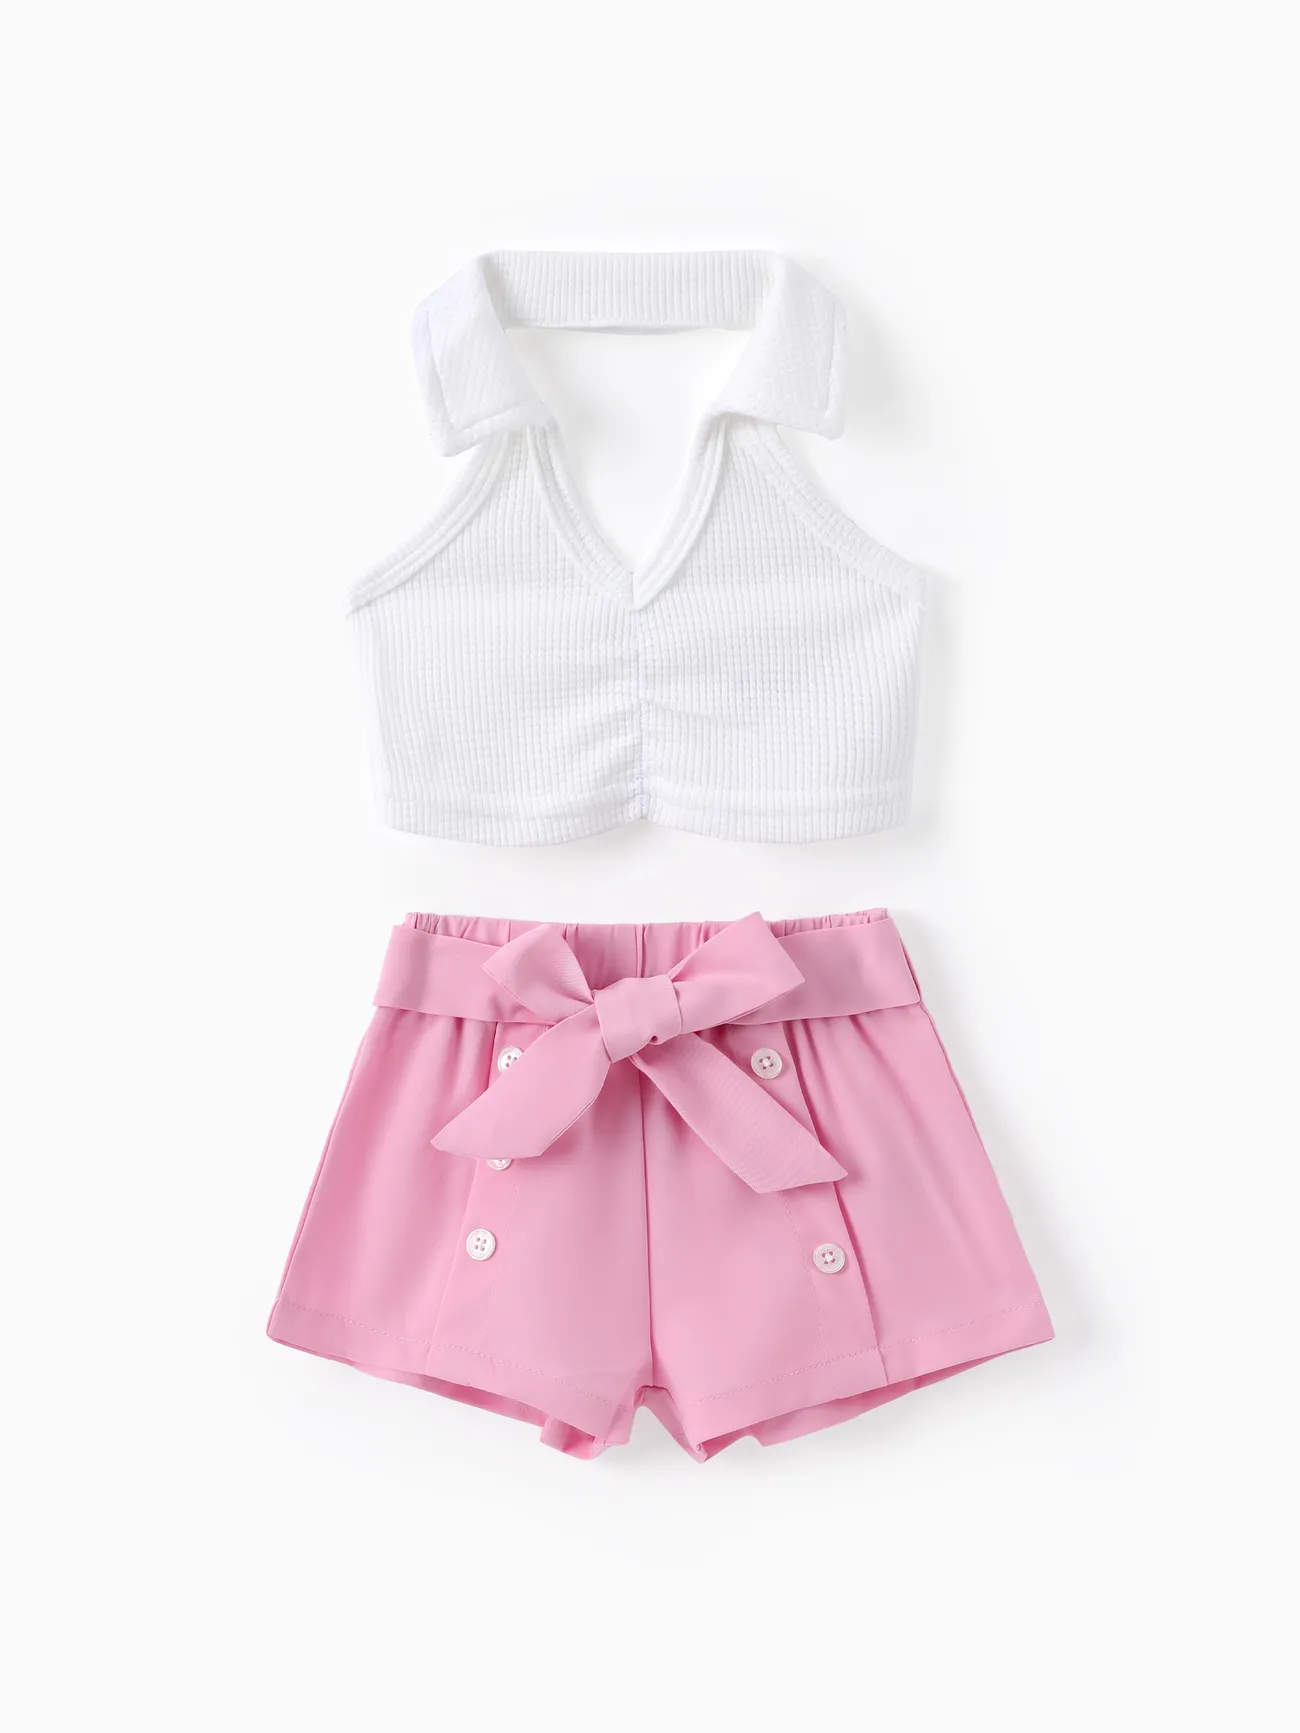 Baby Girl 2pcs Lapel Collar Top and Belted Shorts Set White big image 1